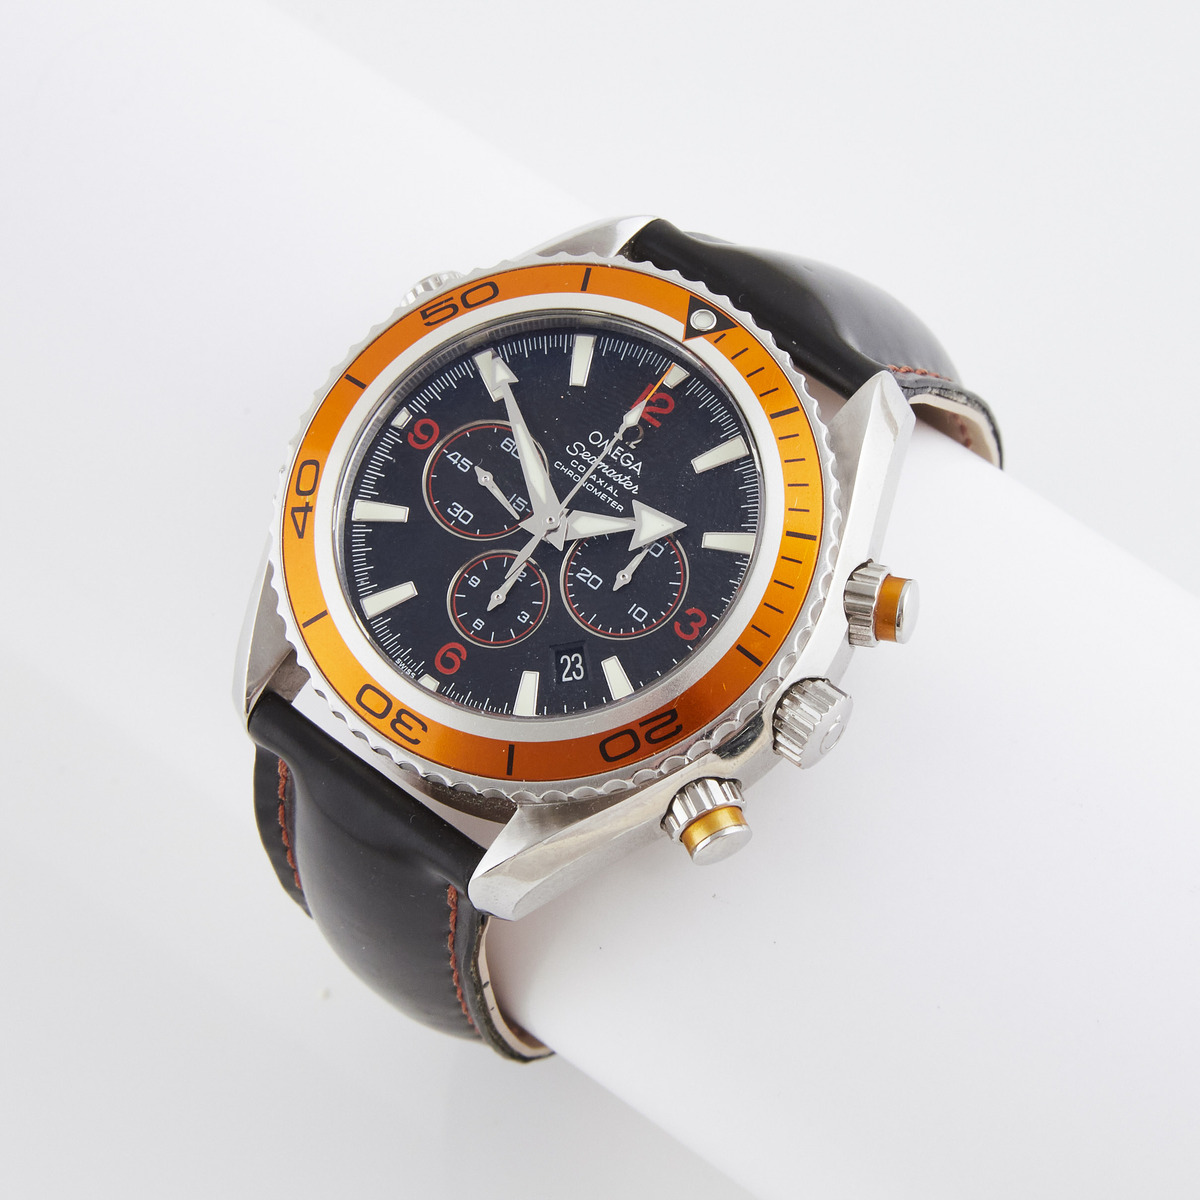 Omega Seamaster Planet Ocean Wristwatch With Chronograph And Date, circa 2007; reference #2918.50.38